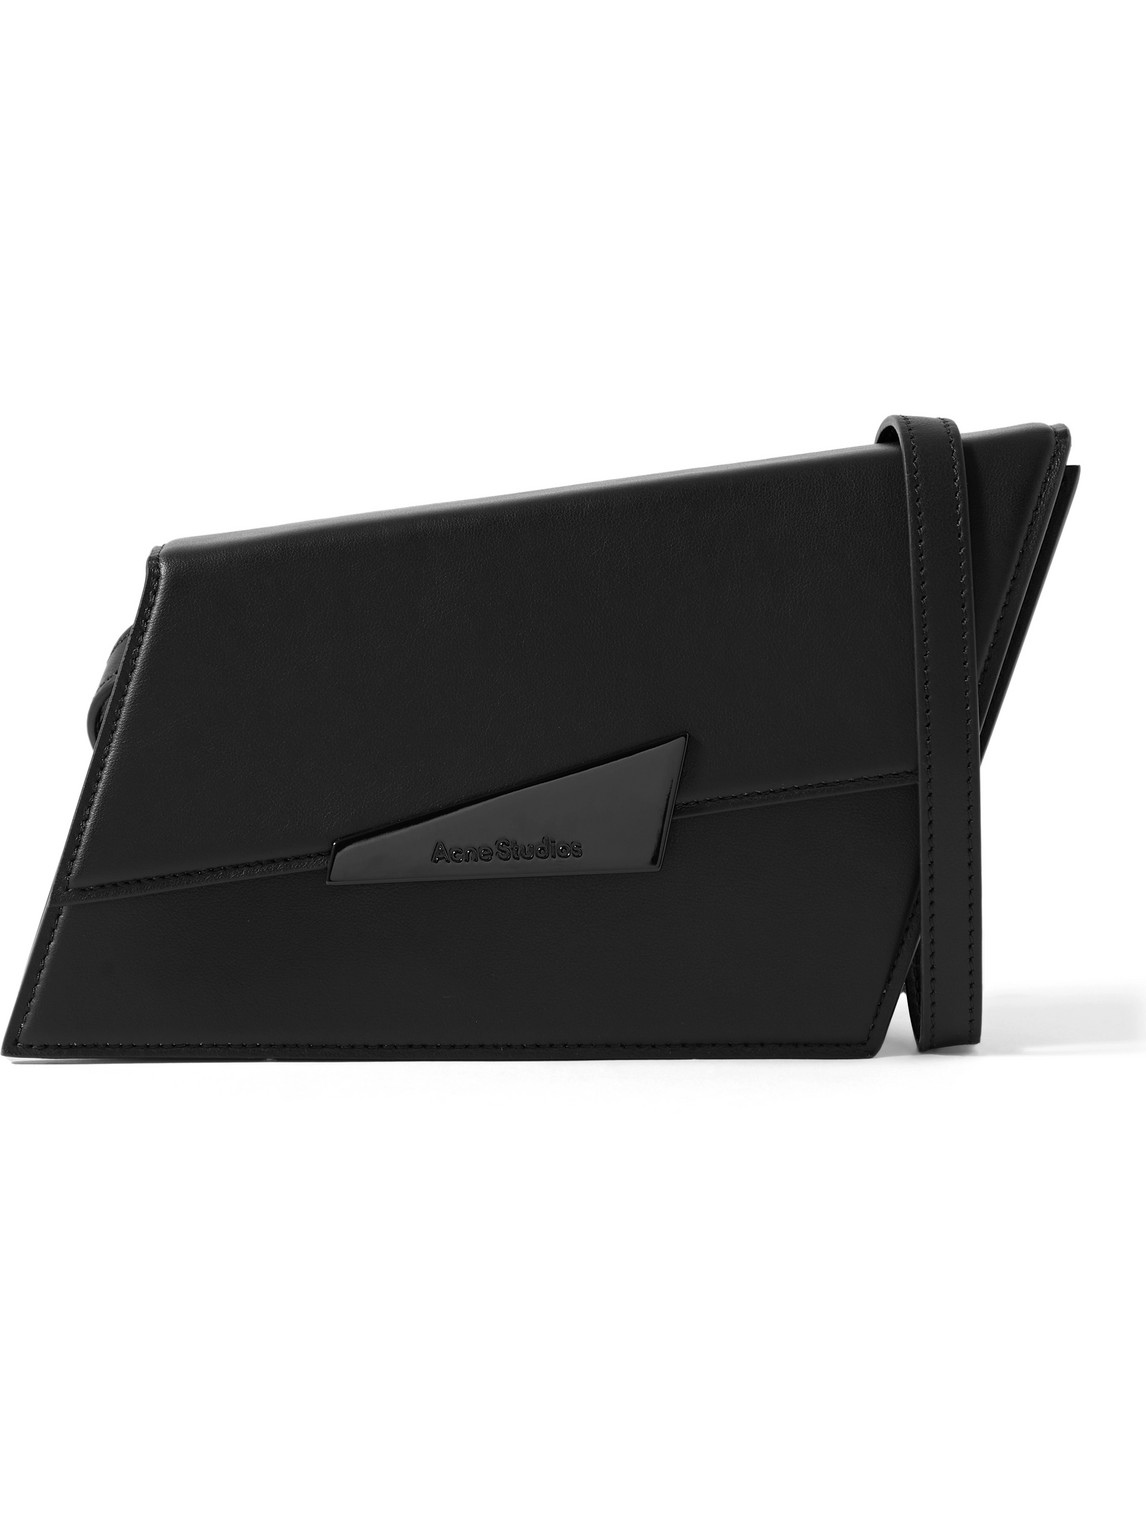 Acne Studios Distortion Micro Leather Messenger Bag In Black